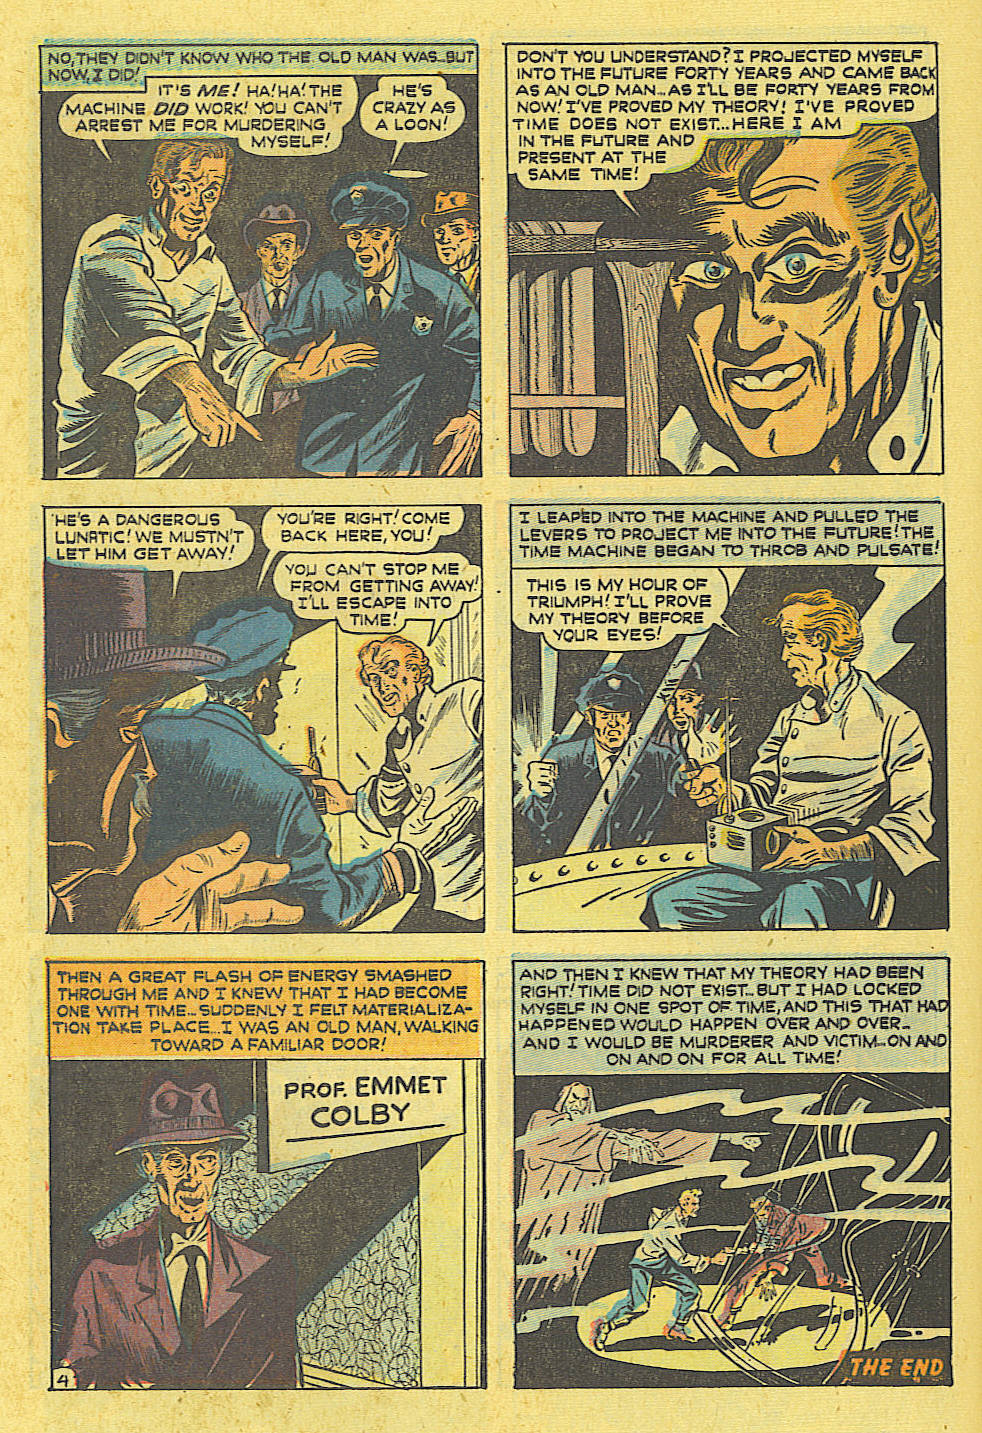 Marvel Tales (1949) 95 Page 23